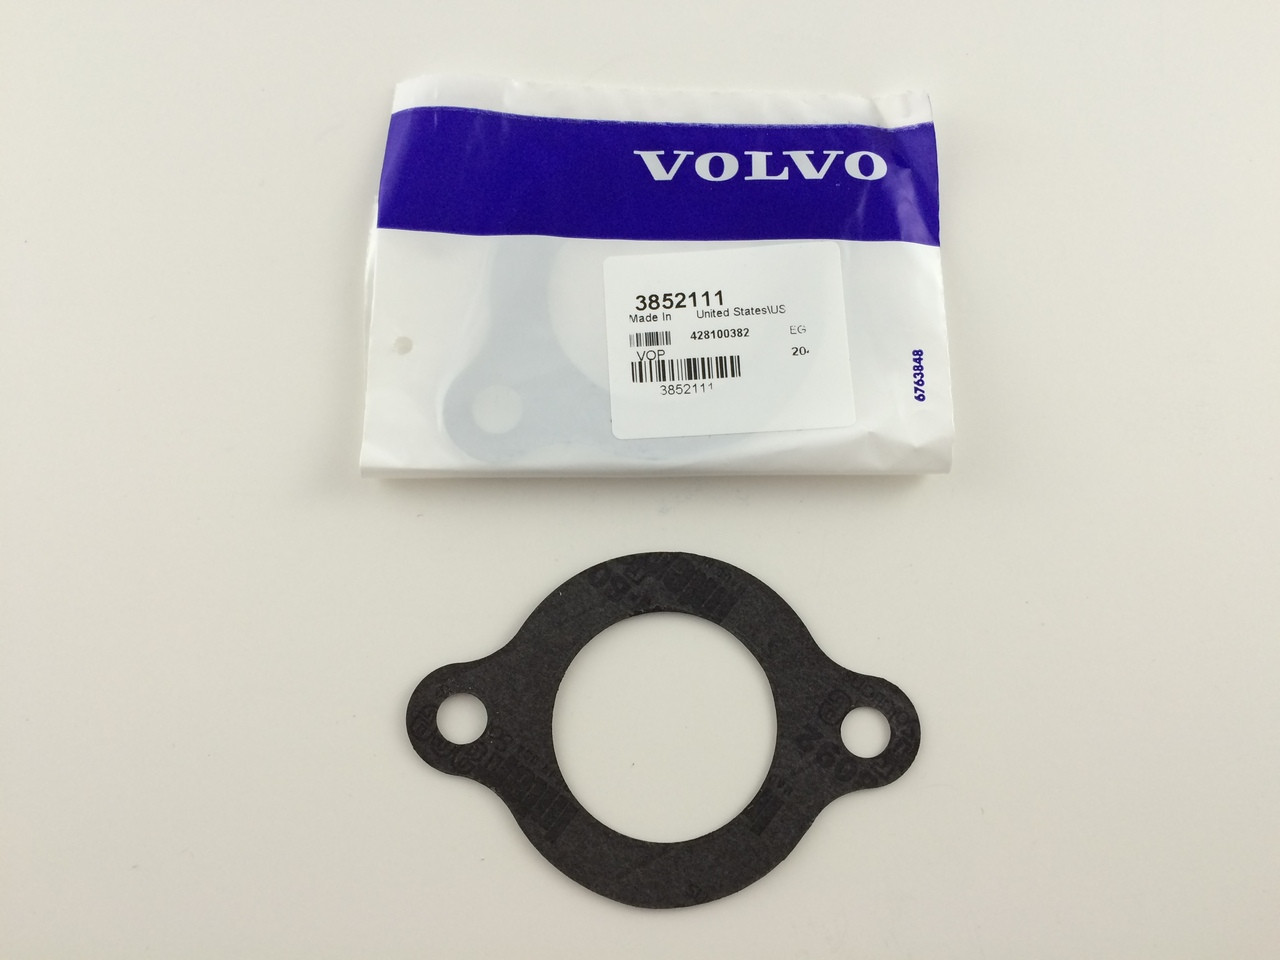 $14.99* GENUINE VOLVO no tax* THERMOSTAT GASKET 3852111 *In Stock & Ready To Ship!